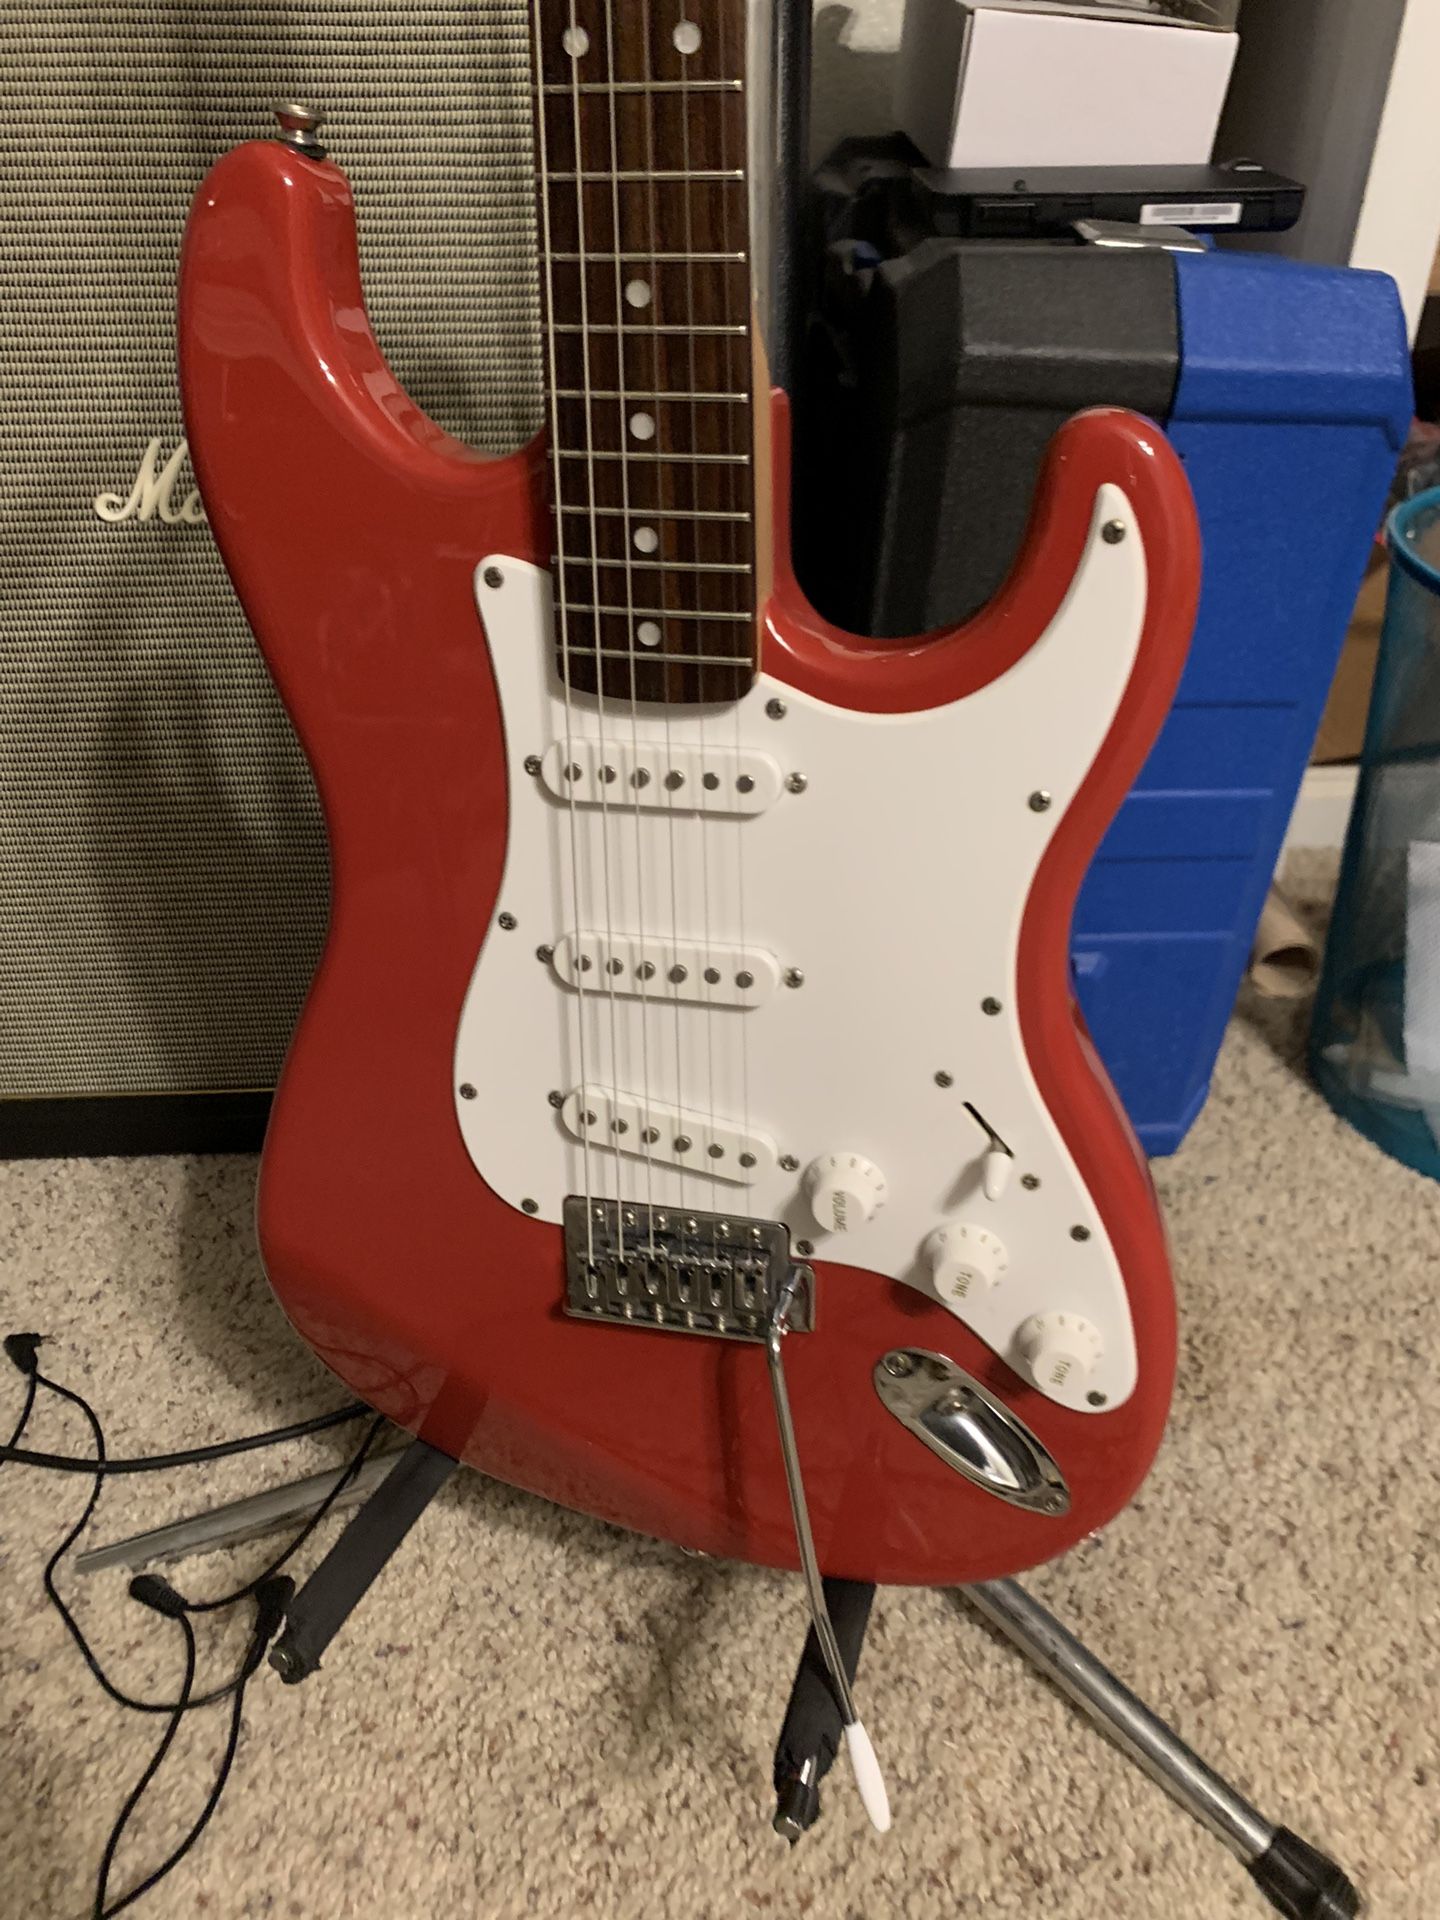 Like New 2011 Fender Starcaster Stratocaster / Strat Electric Guitar - Classic Rally Red!